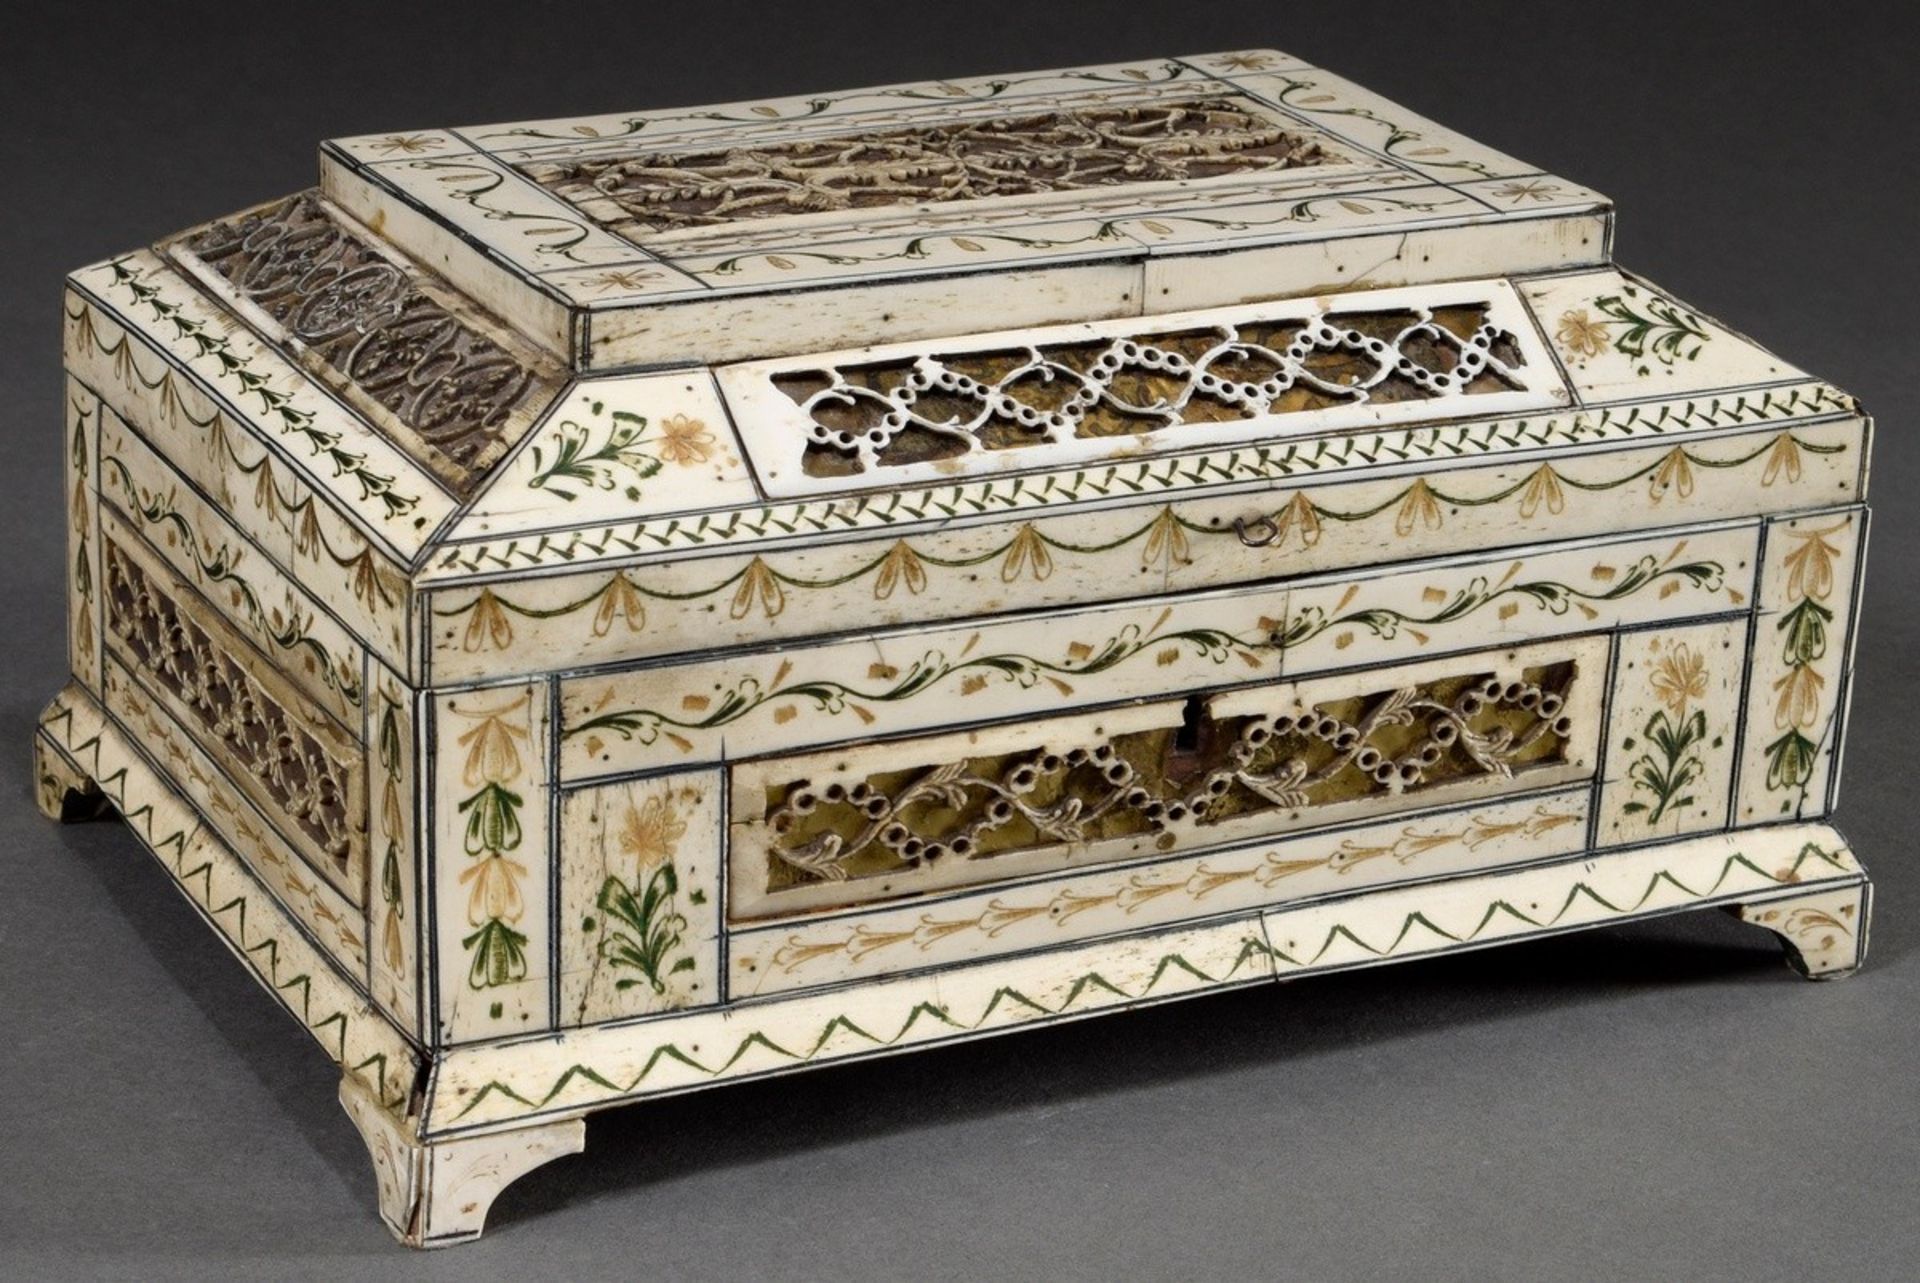 Finely sawn Arkhangelsk casket with stepped hinged lid and rectangular body on feet, engraved whale